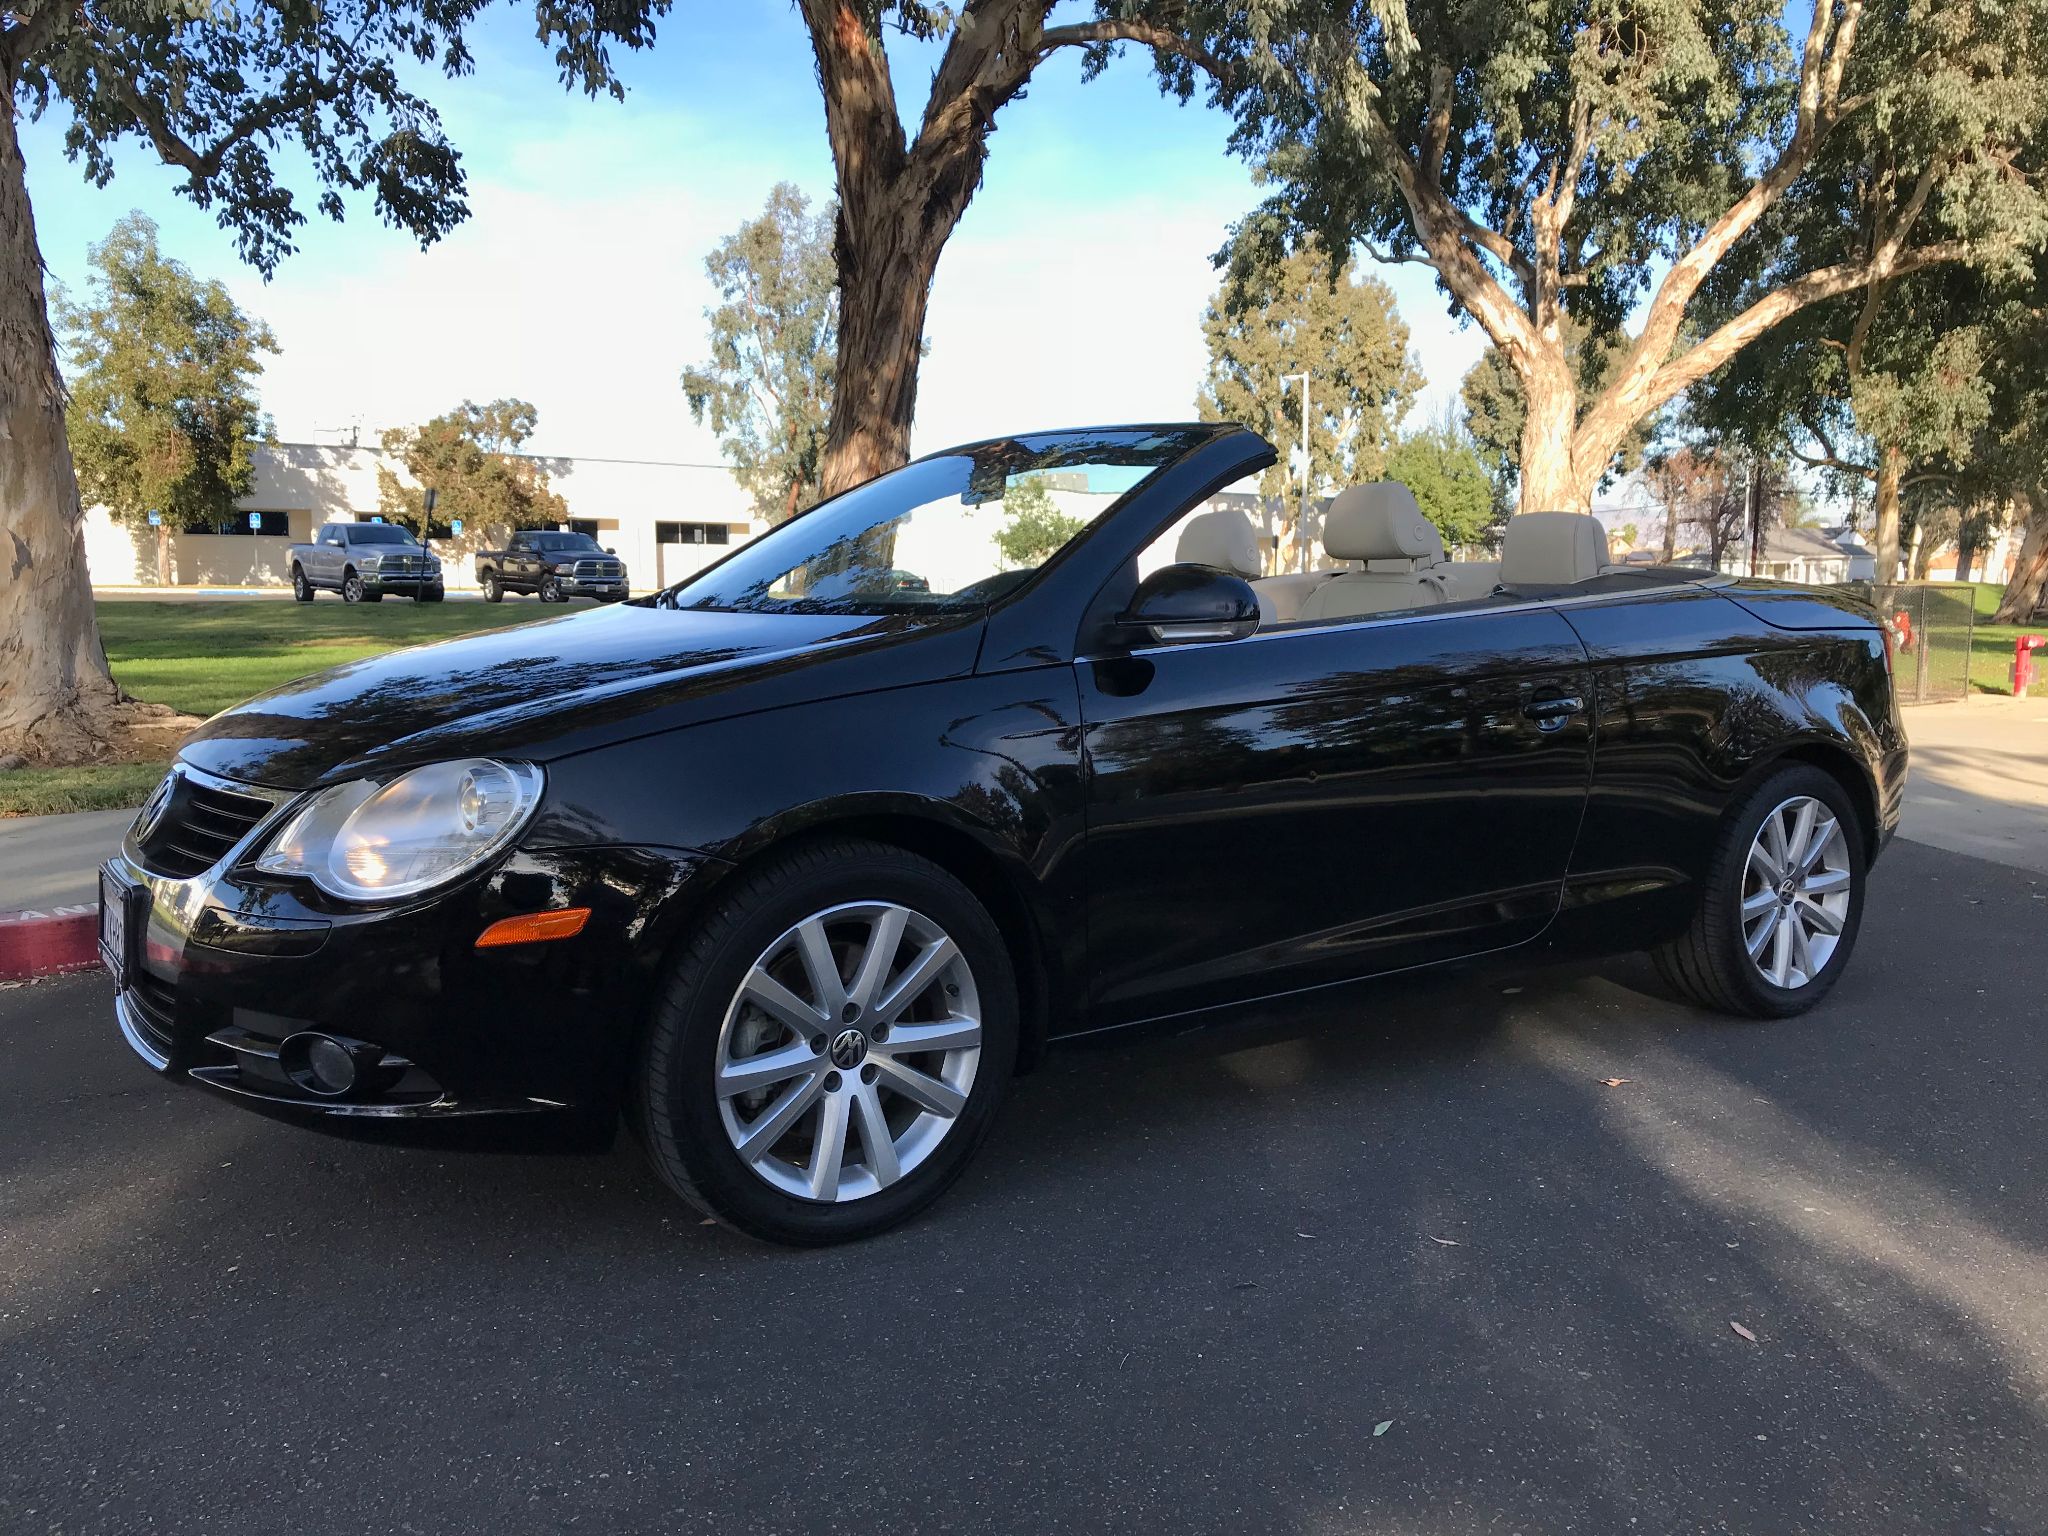 Used 2007 Volkswagen Eos 2.0T at City Cars Warehouse Inc